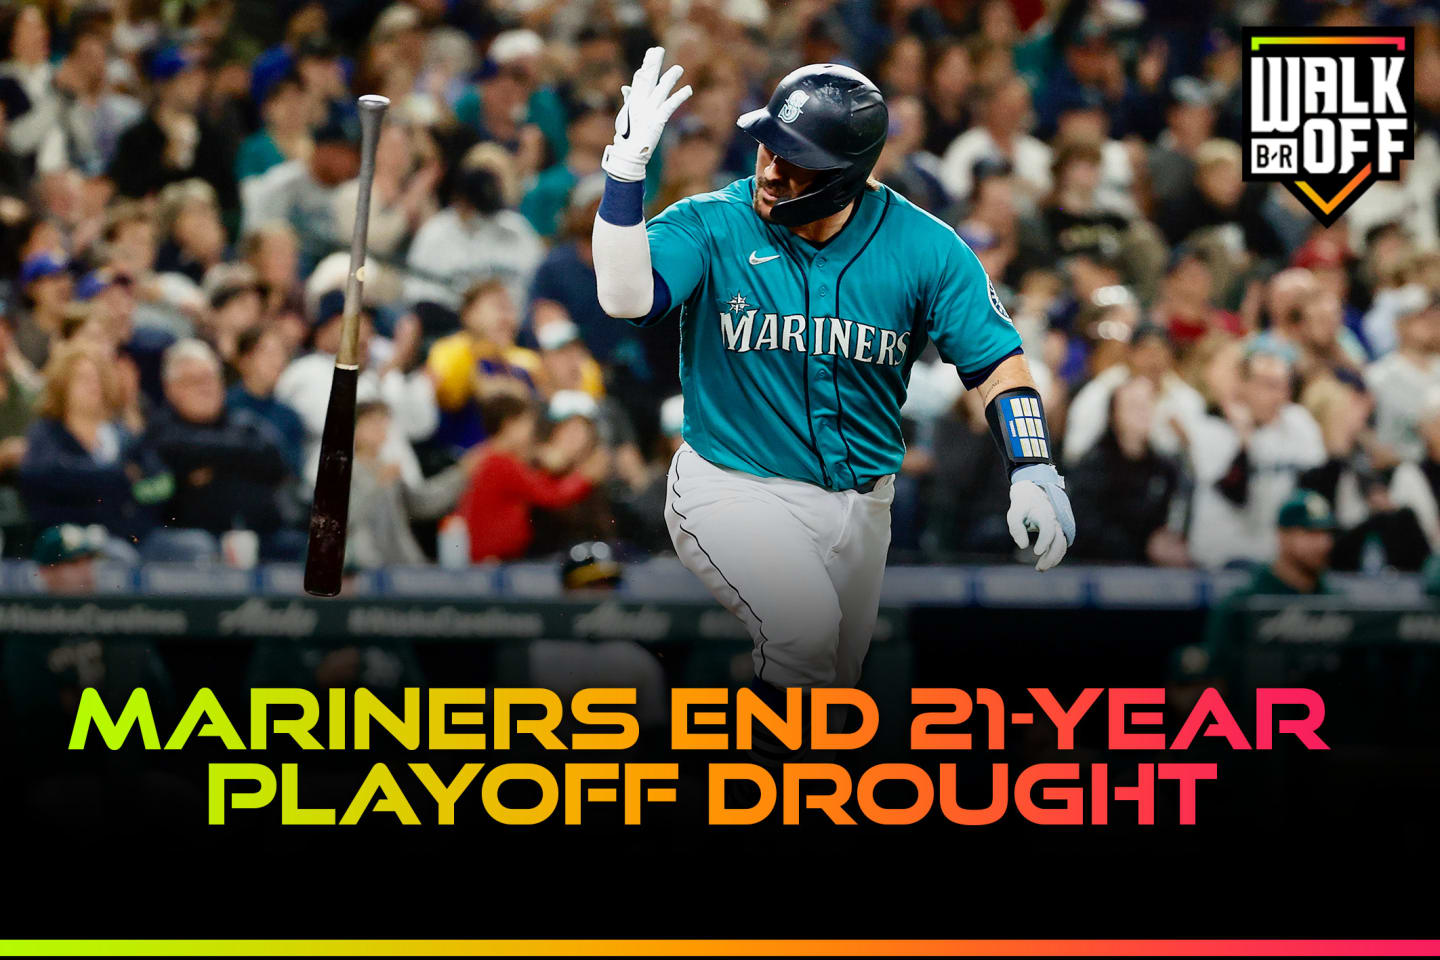 Mariners beat A's 2-1